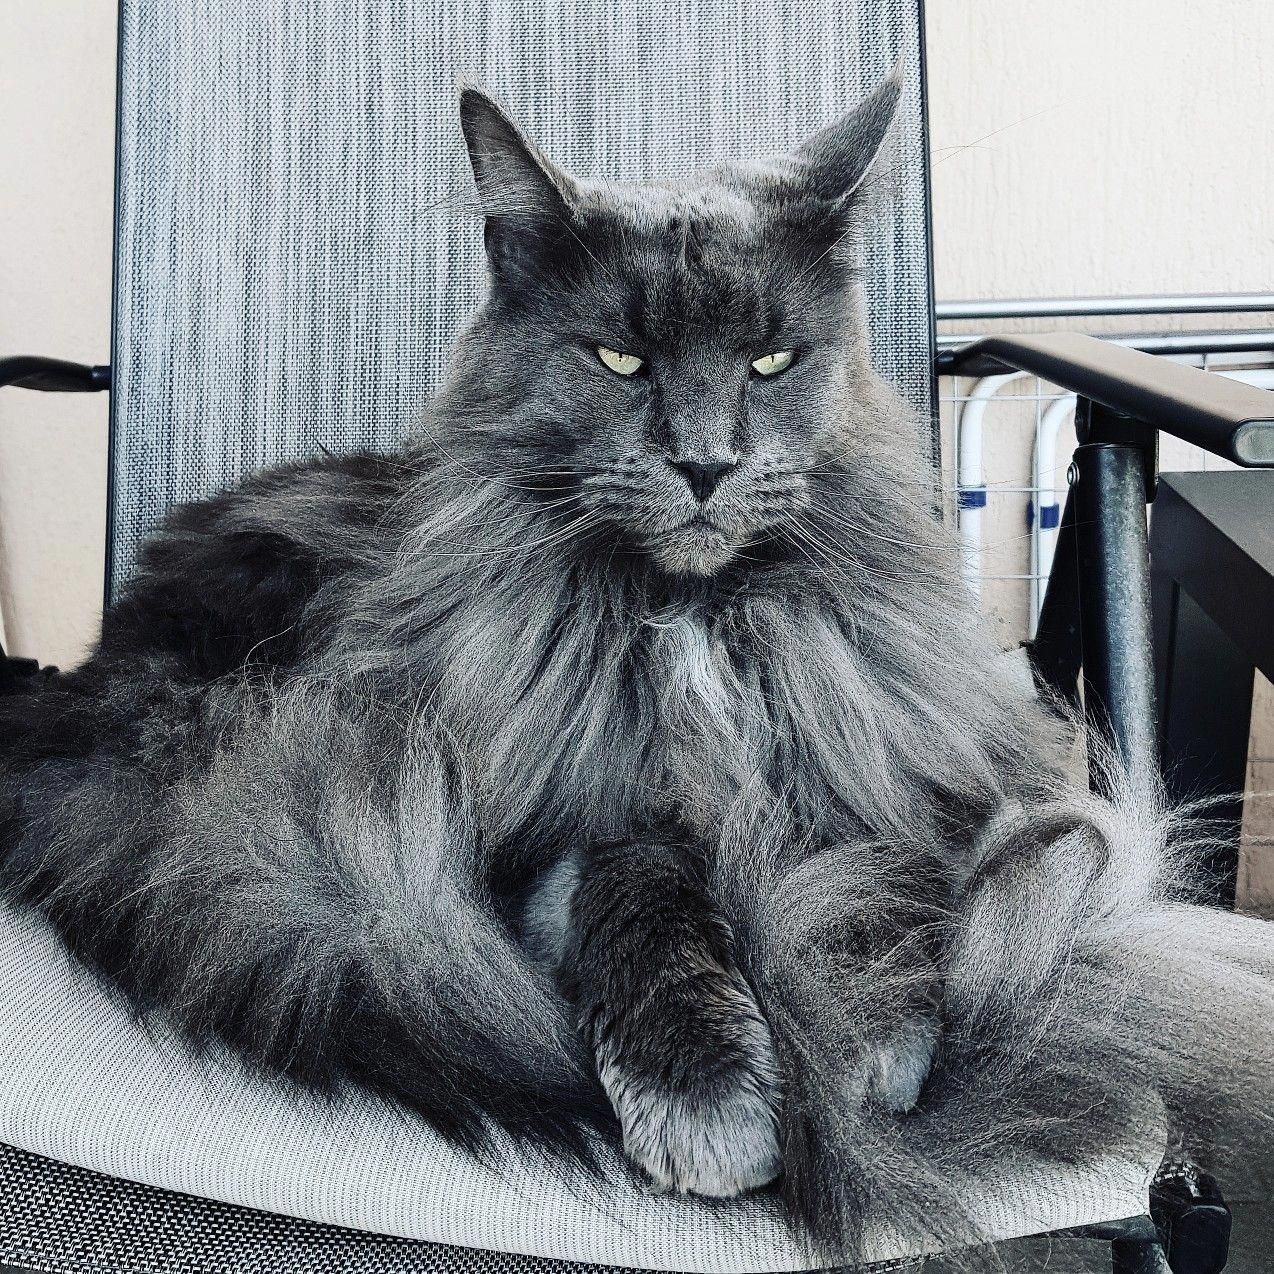 Full blooded maine coon cat